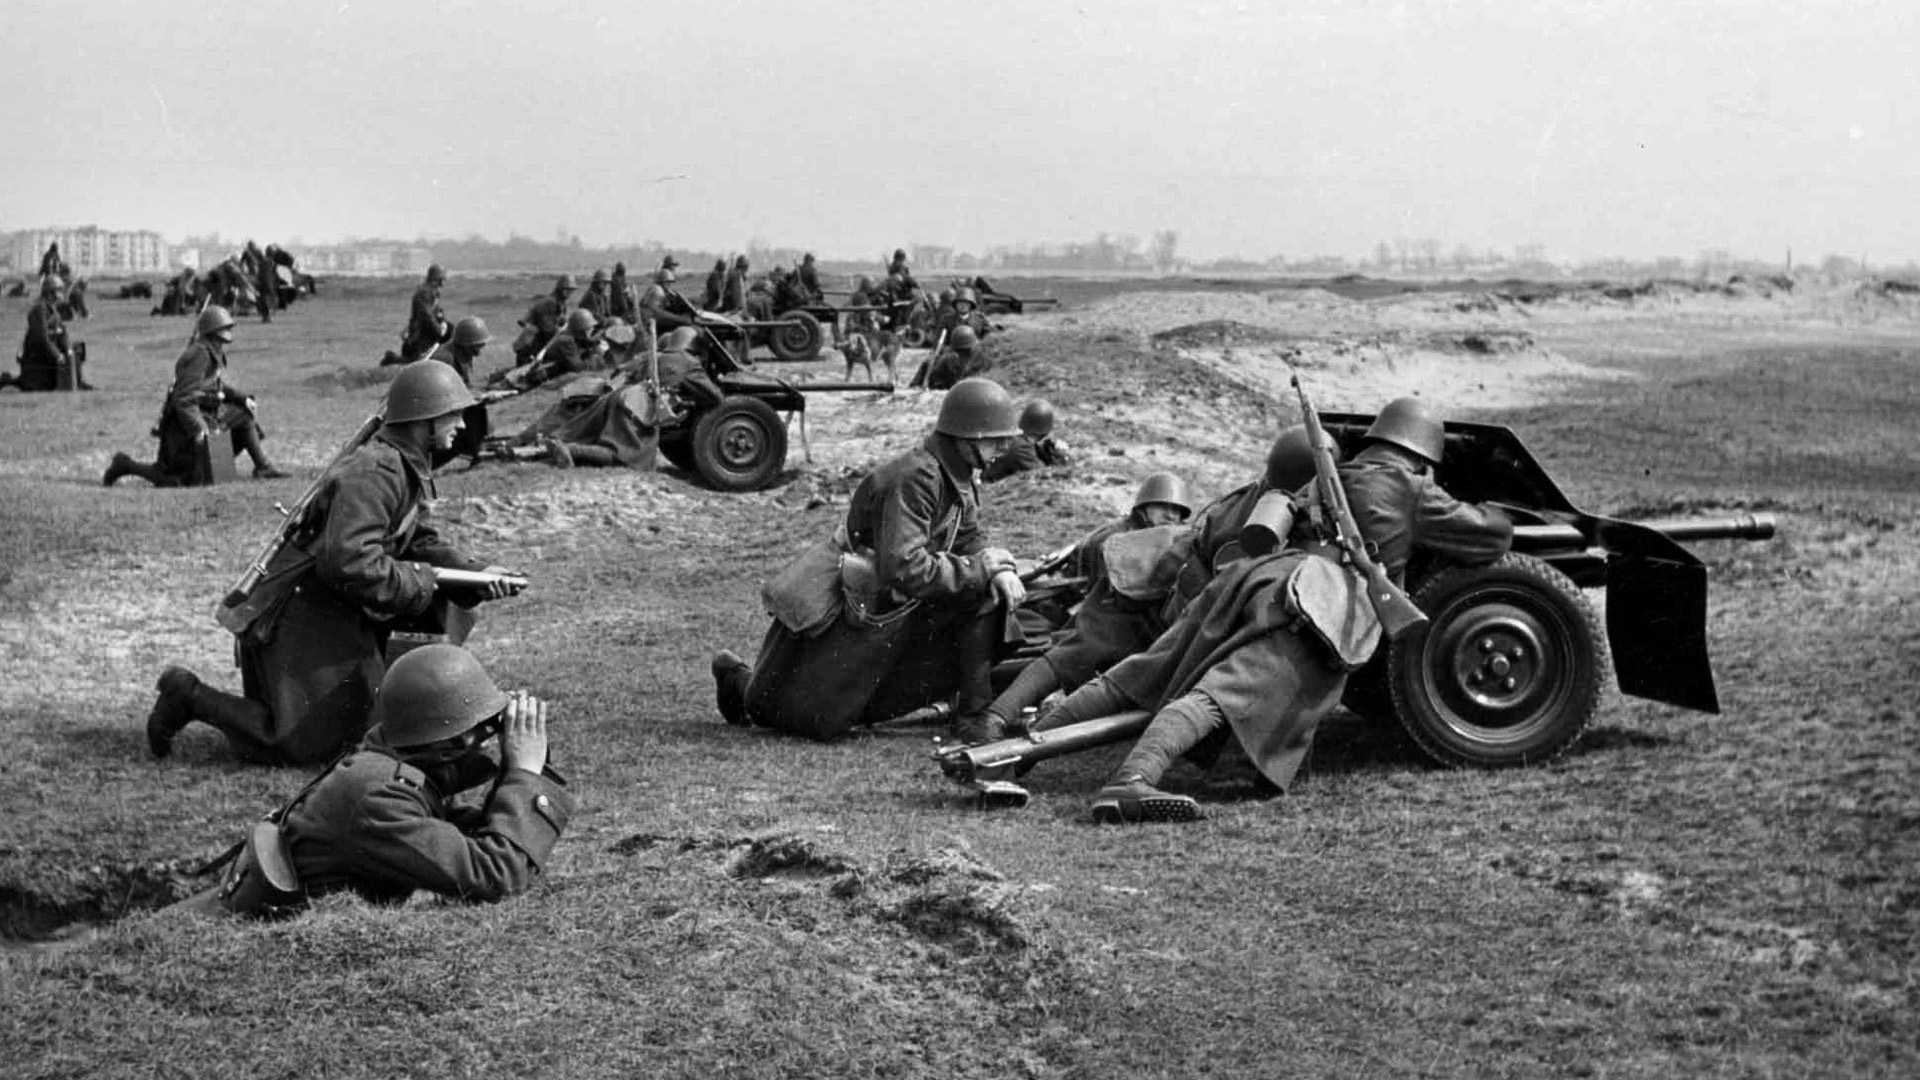 Polish troops engage in field exercises in April 1939, just five months before the Nazi invasion of their country and the outbreak of World War II. Some Poles initially thought the Soviet Army was there to help them.